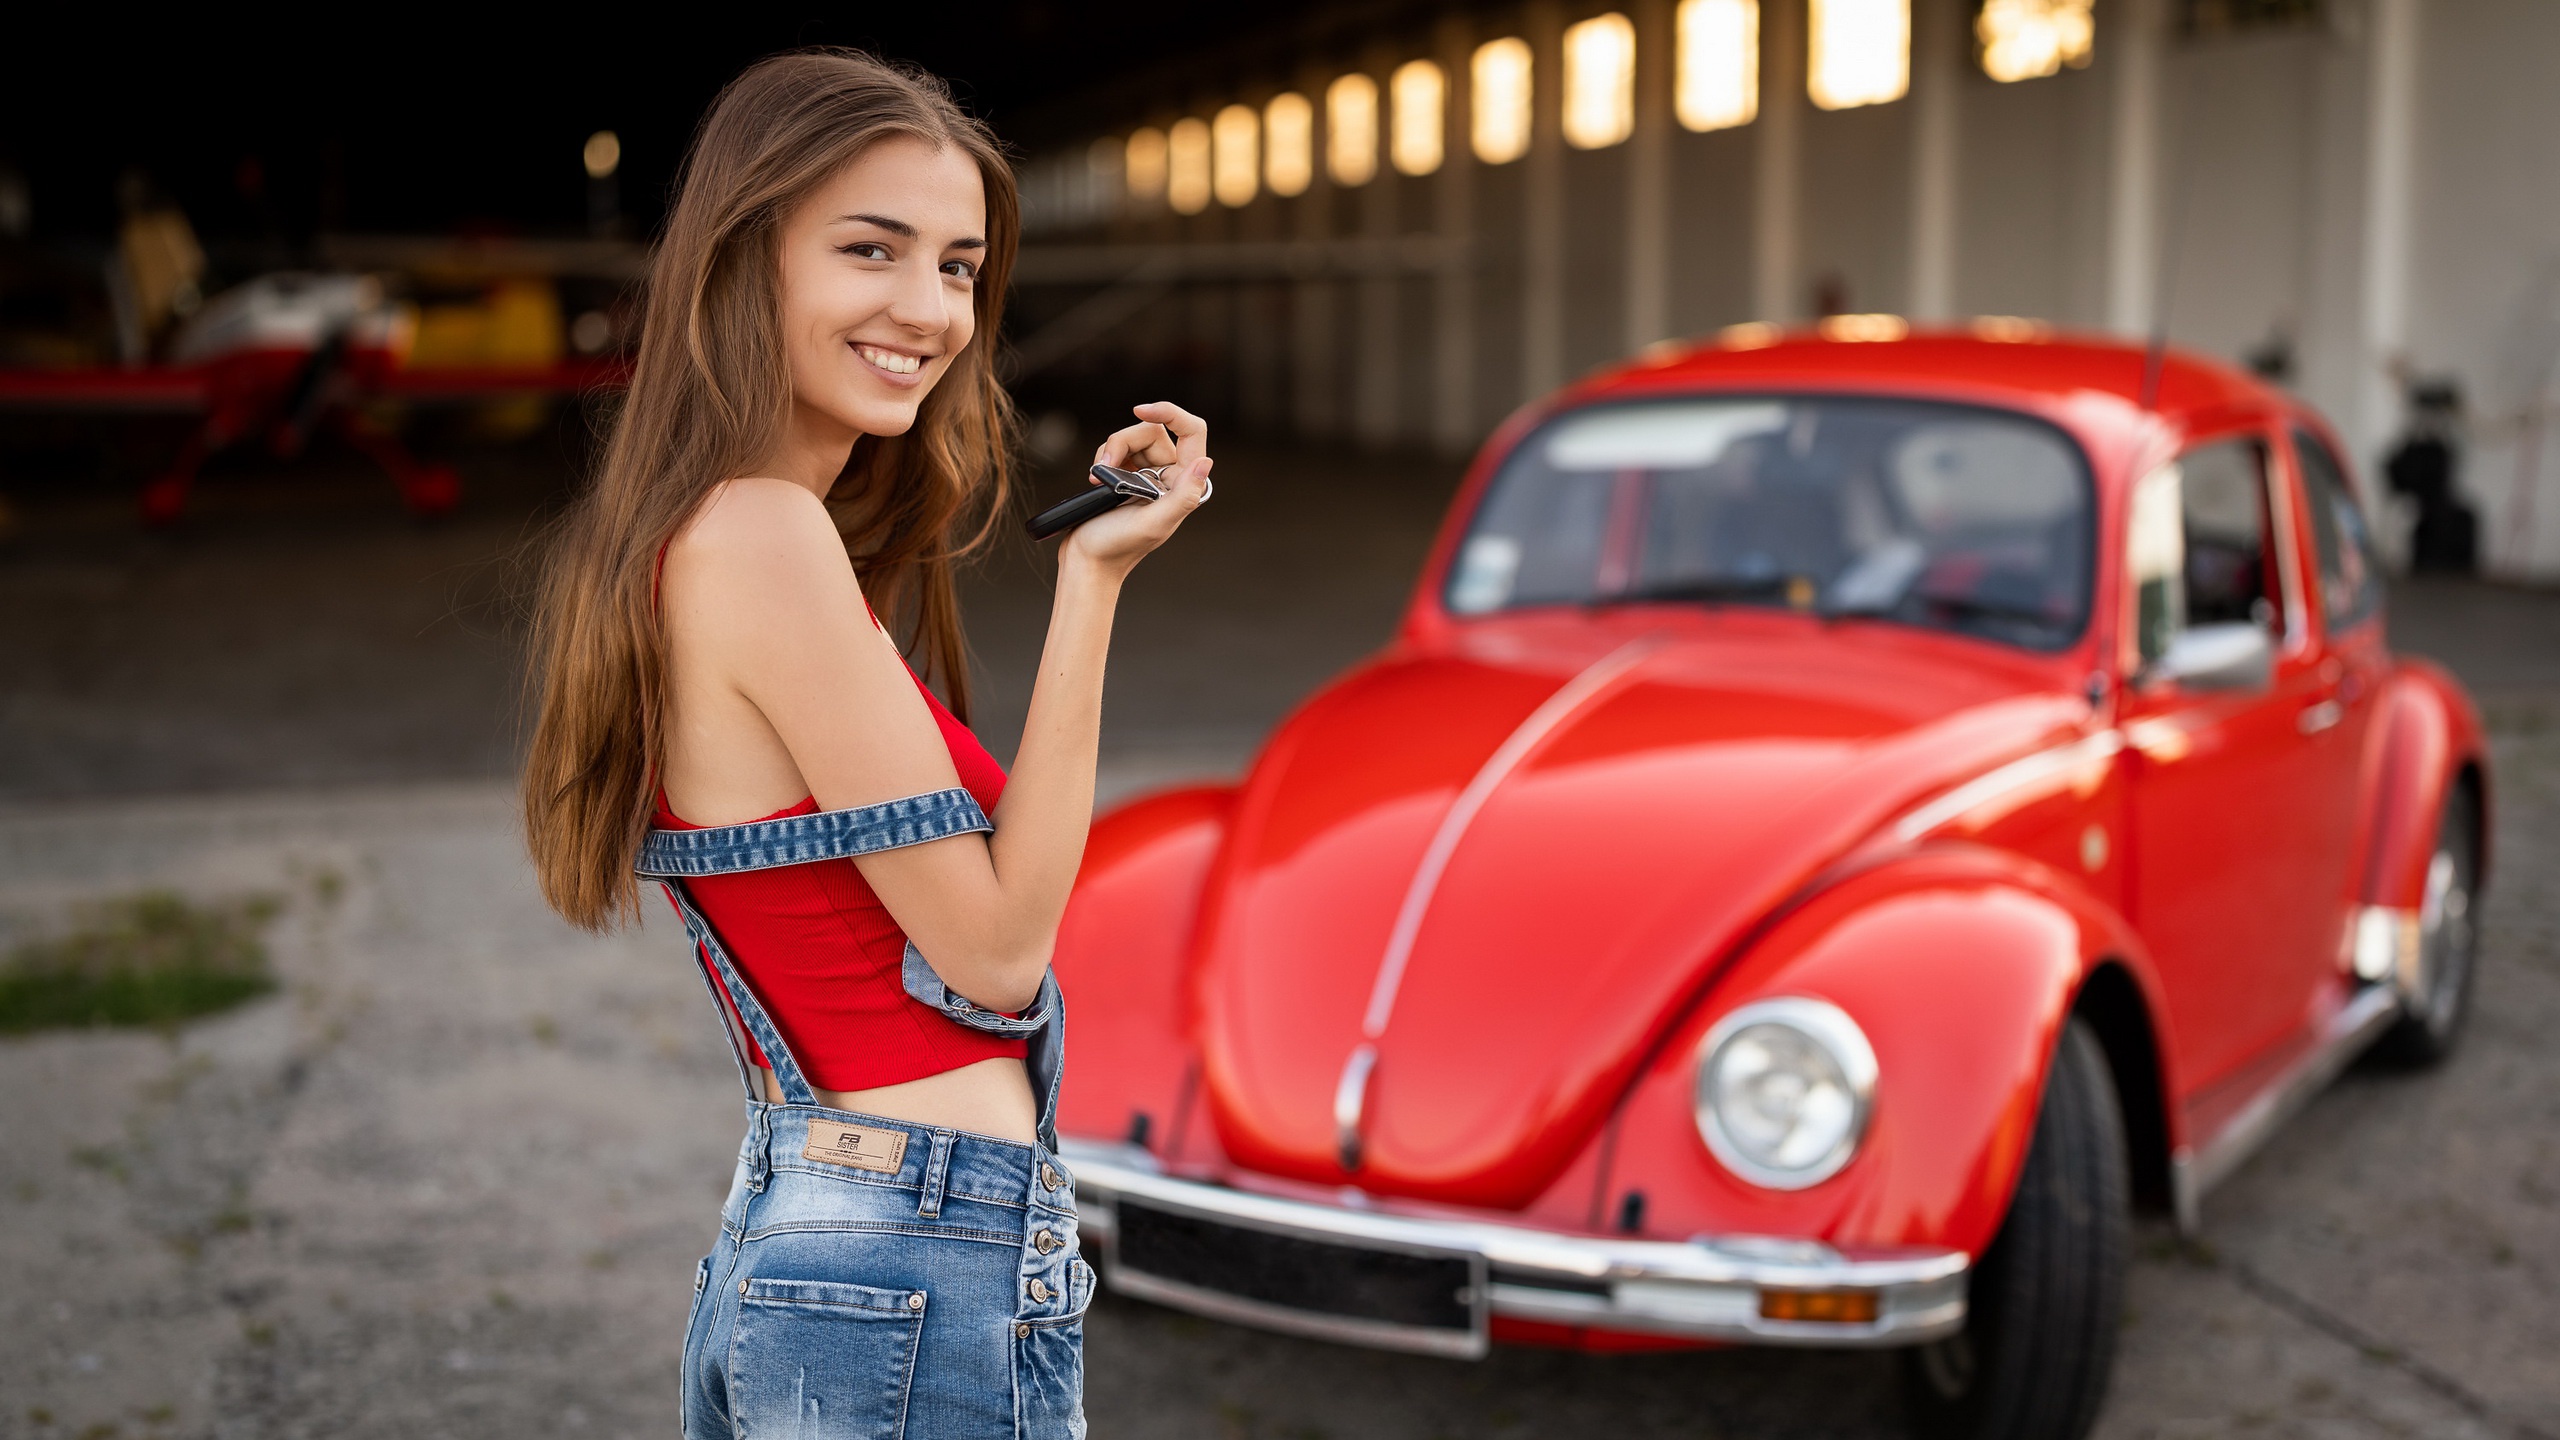 Women Model Women With Cars Car Vehicle Volkswagen Red Cars Smiling Brunette Long Hair Looking At Vi 2560x1440